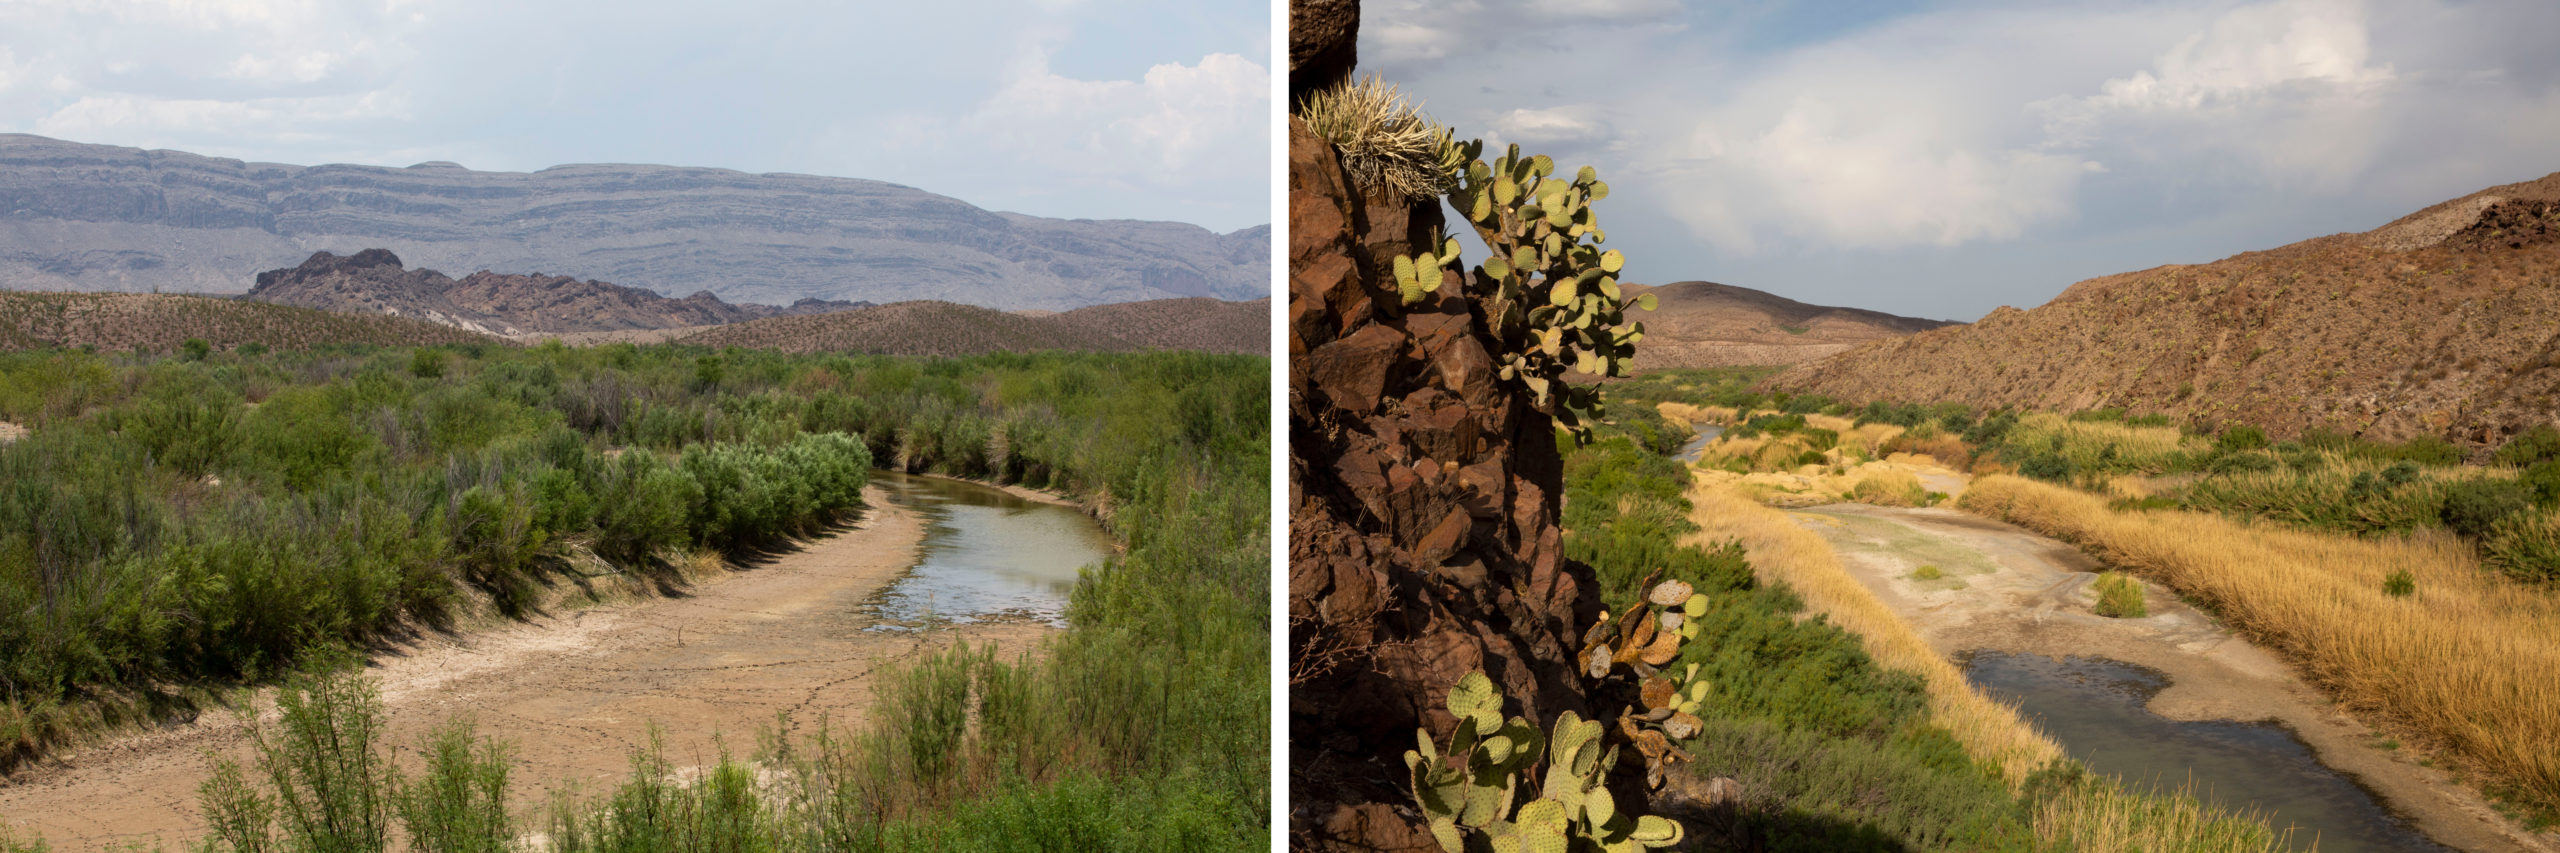 A composite image showing two photos of the drying Rio Grande river bed, surrounded by scrubby plants and yellowing wild grasses.